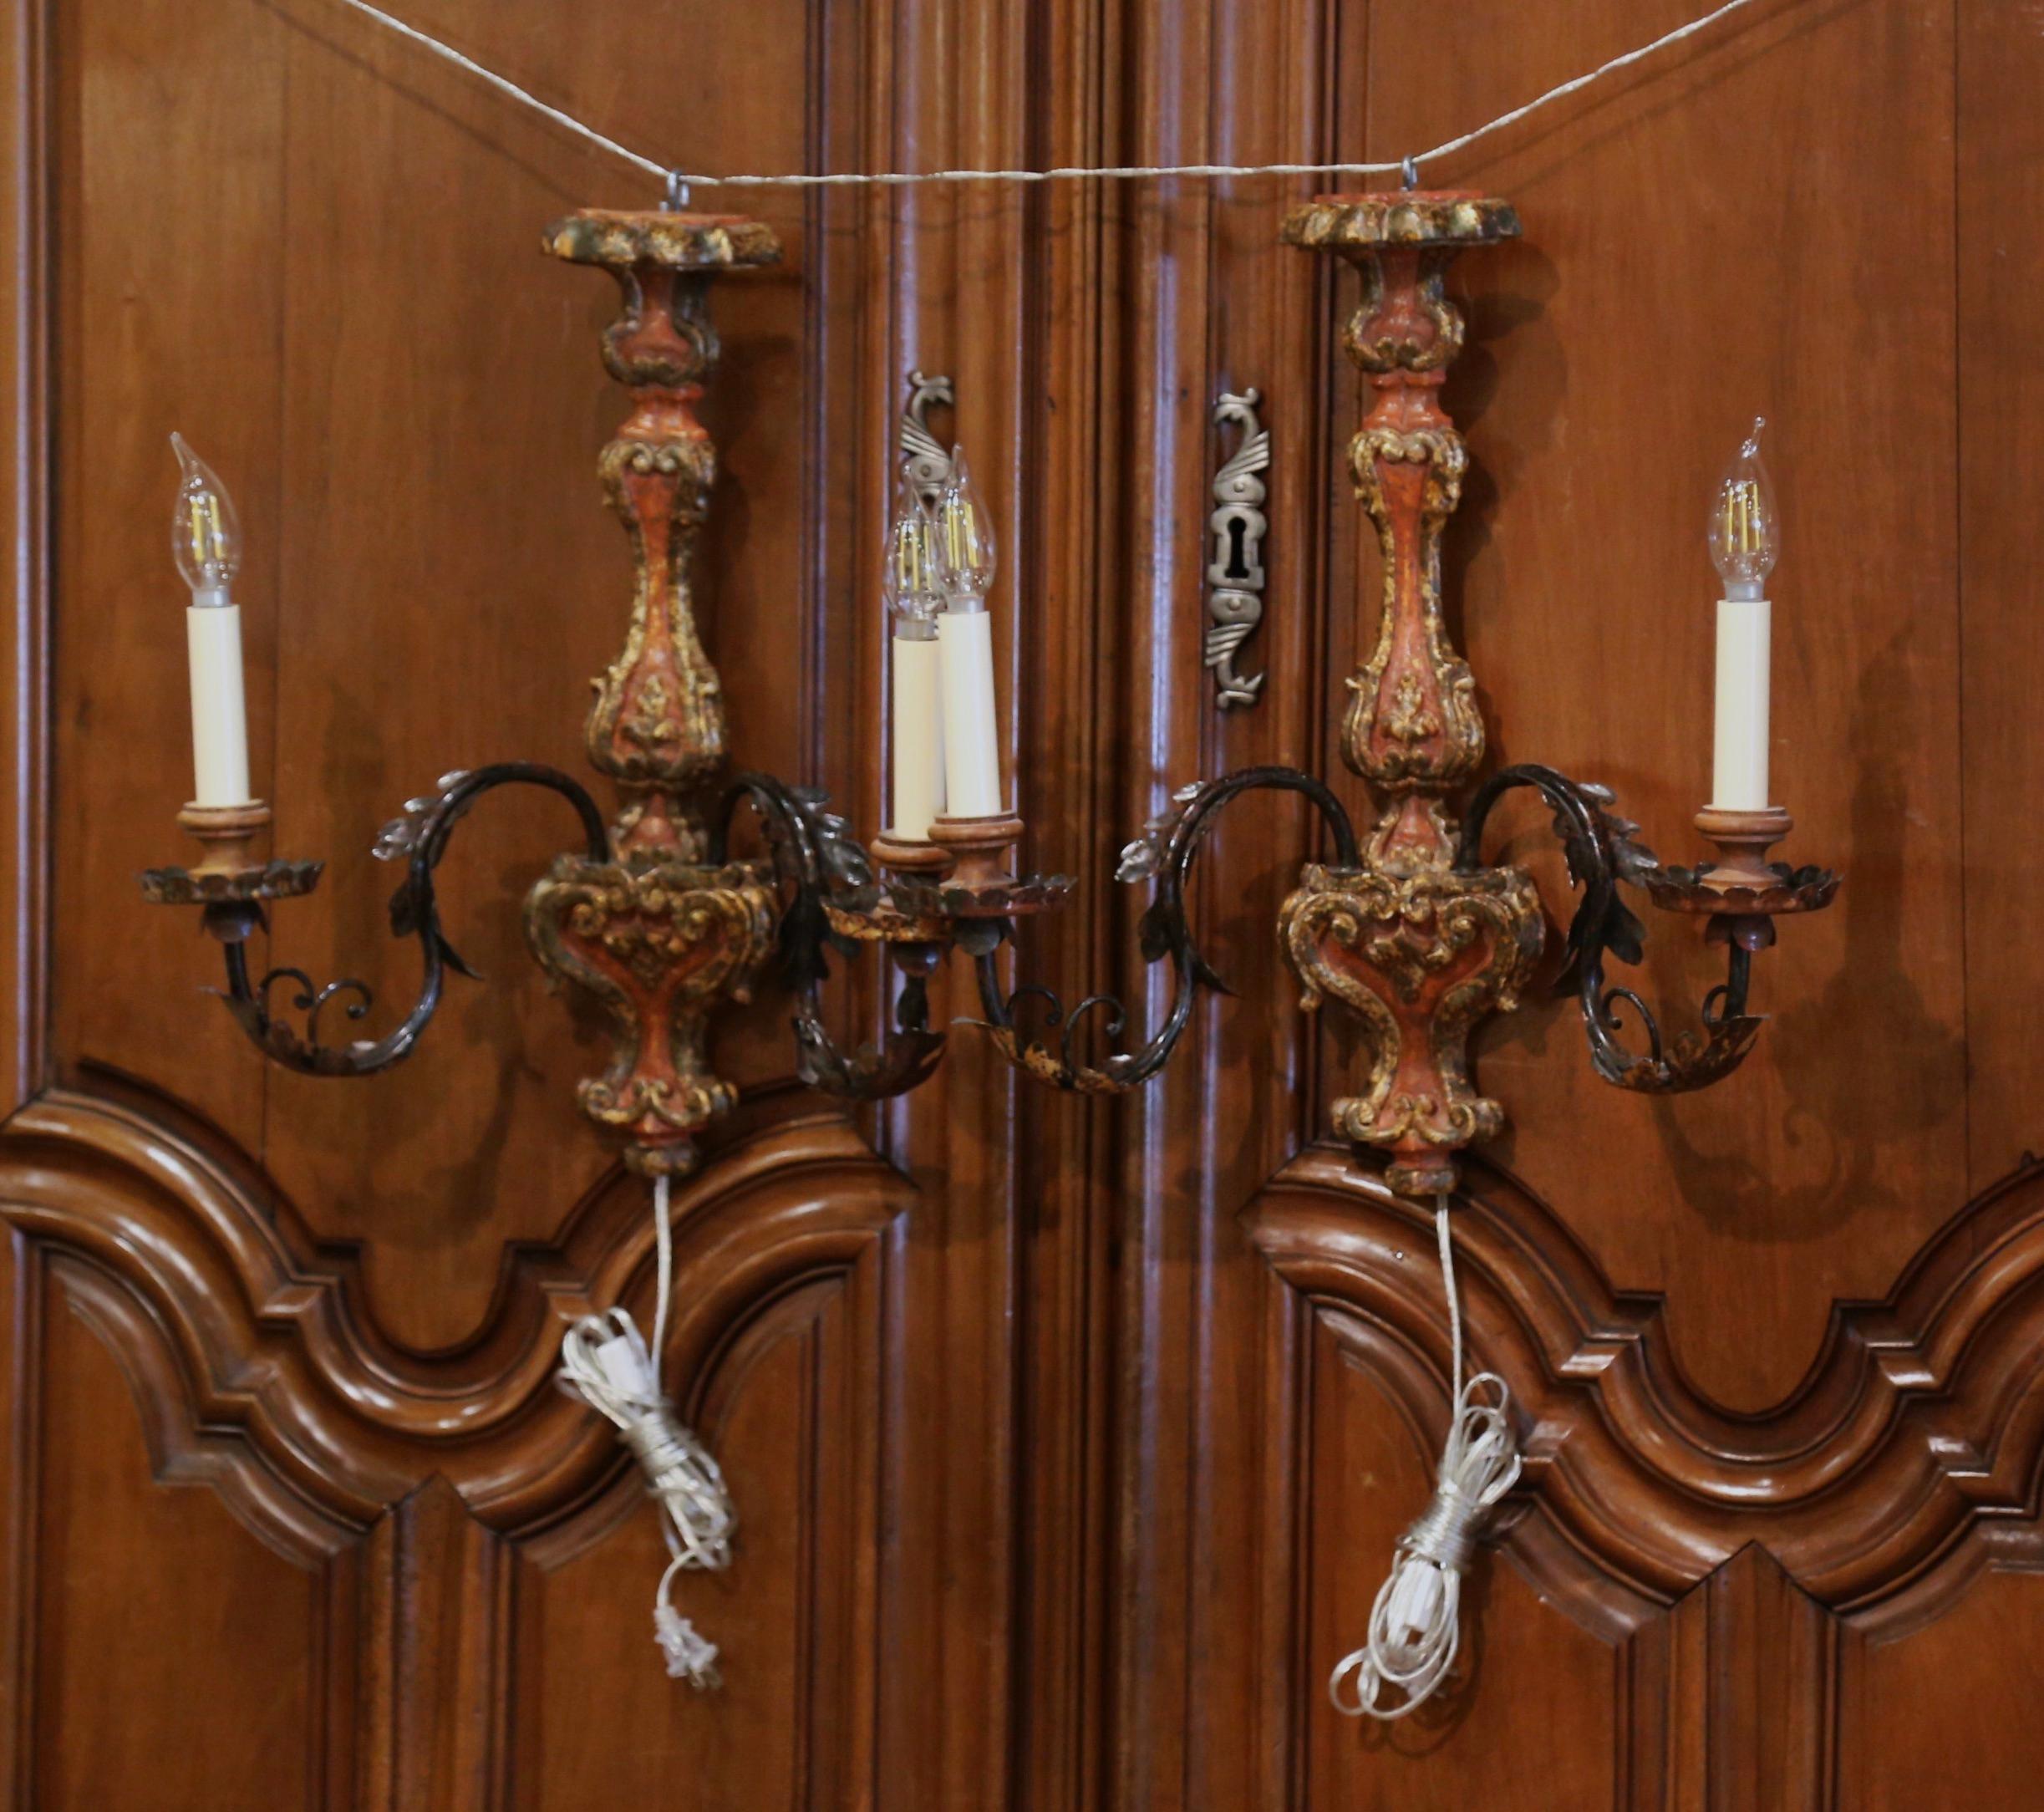 Light up a dining room or powder room with this elegant pair of antique fixtures. Crafted in Italy circa 1980, each sconce features intricate hand-carvings with leaf and scrolled motifs in the Louis XV style; each light has a double metal arm